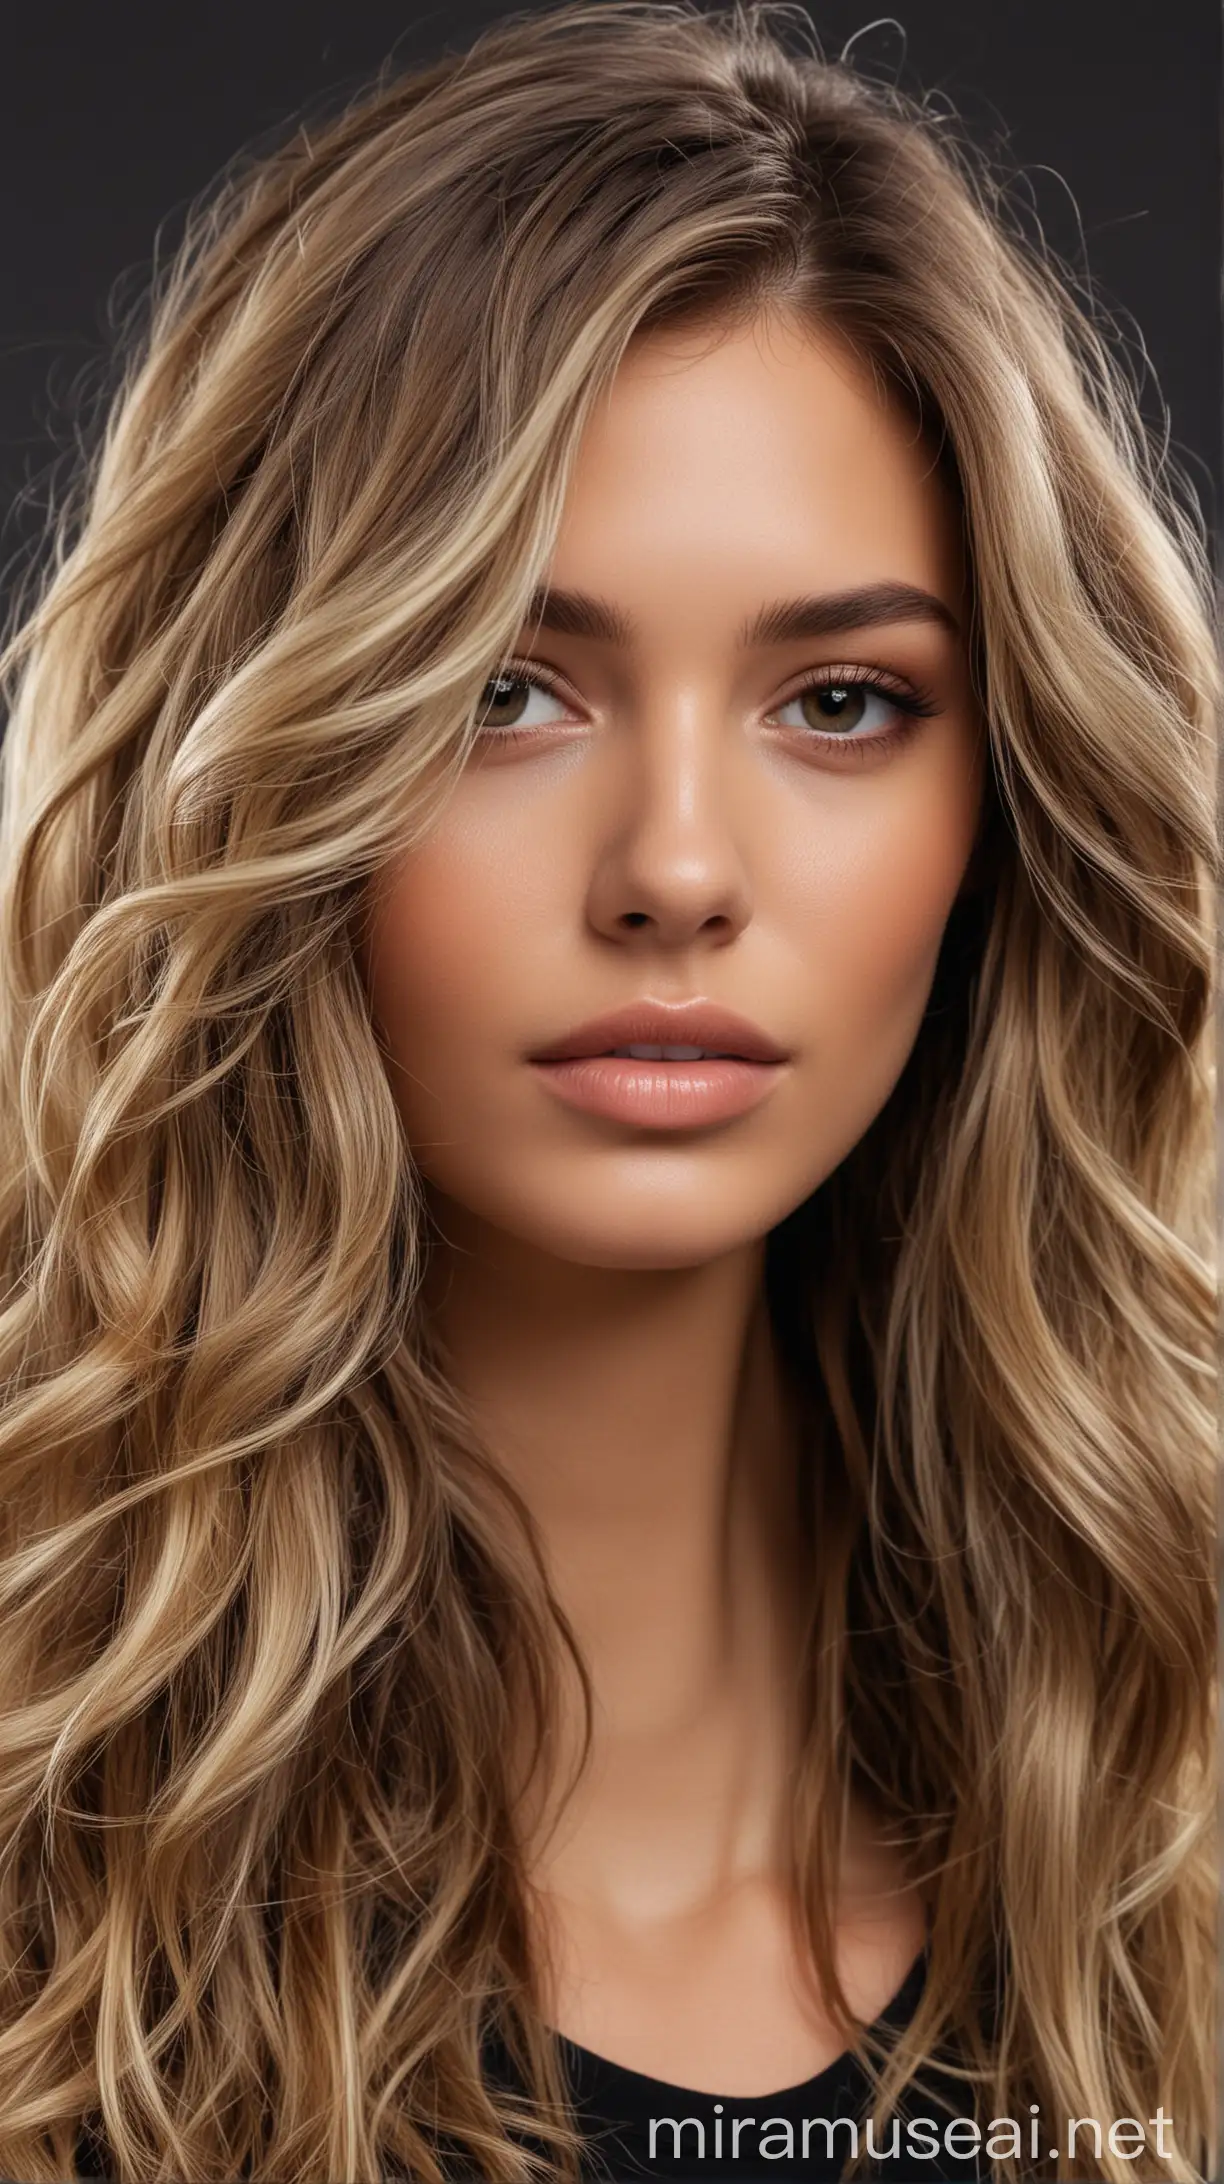 Stunning Balayage Hair Model Striking Beauty with Spectacular Color Highlights